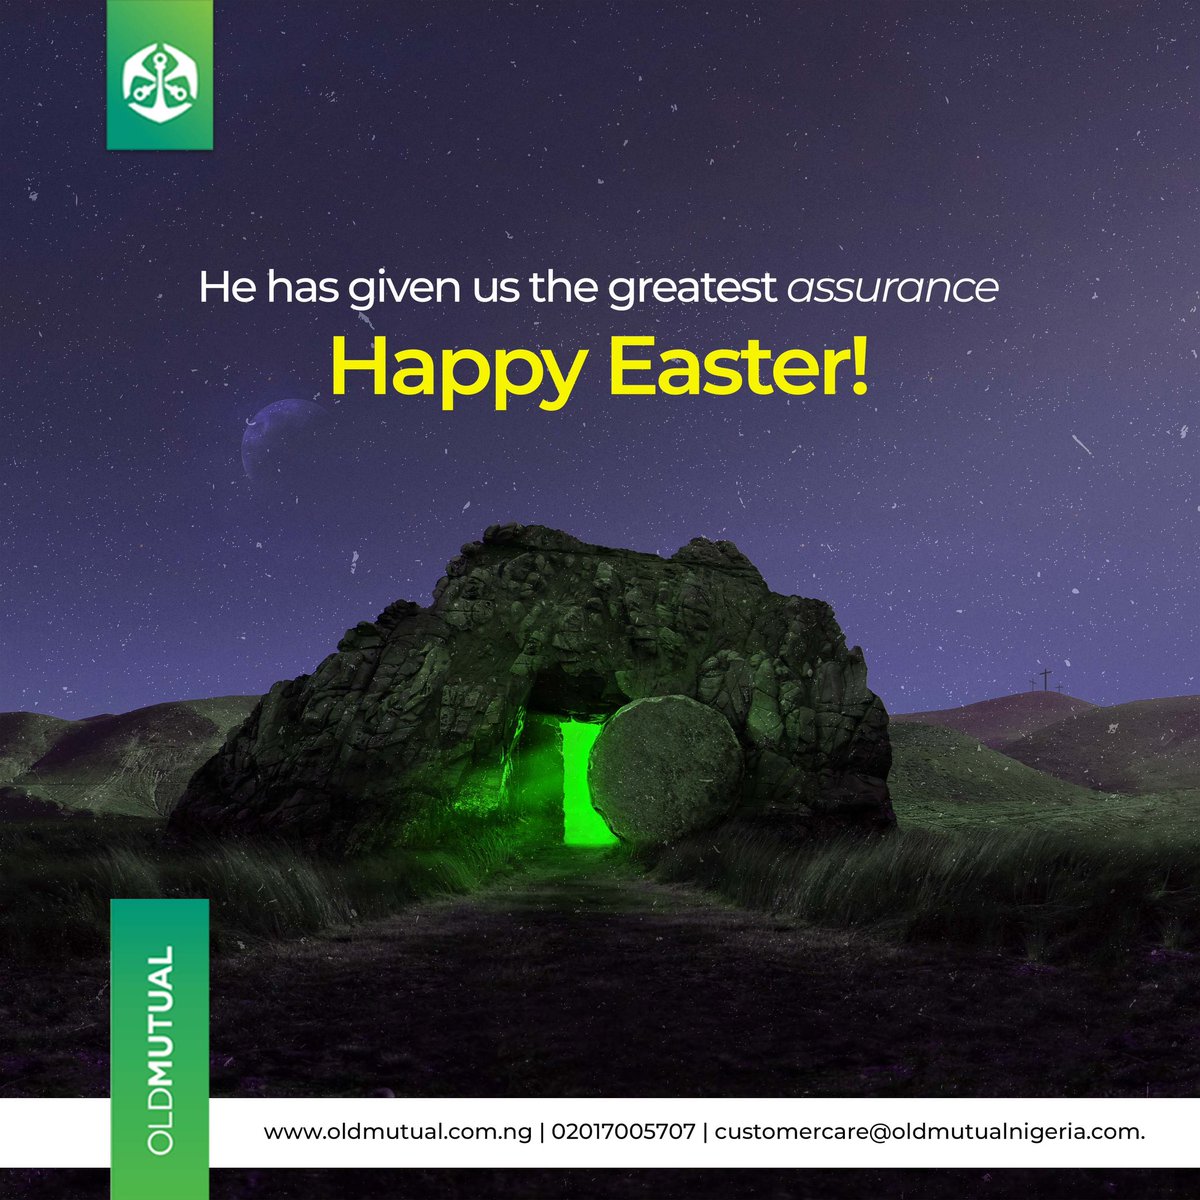 We wish you an Easter filled with joy, hope and assurance of endless possibilities.  Happy Easter!✨ #OMNigeria  #EasterSunday